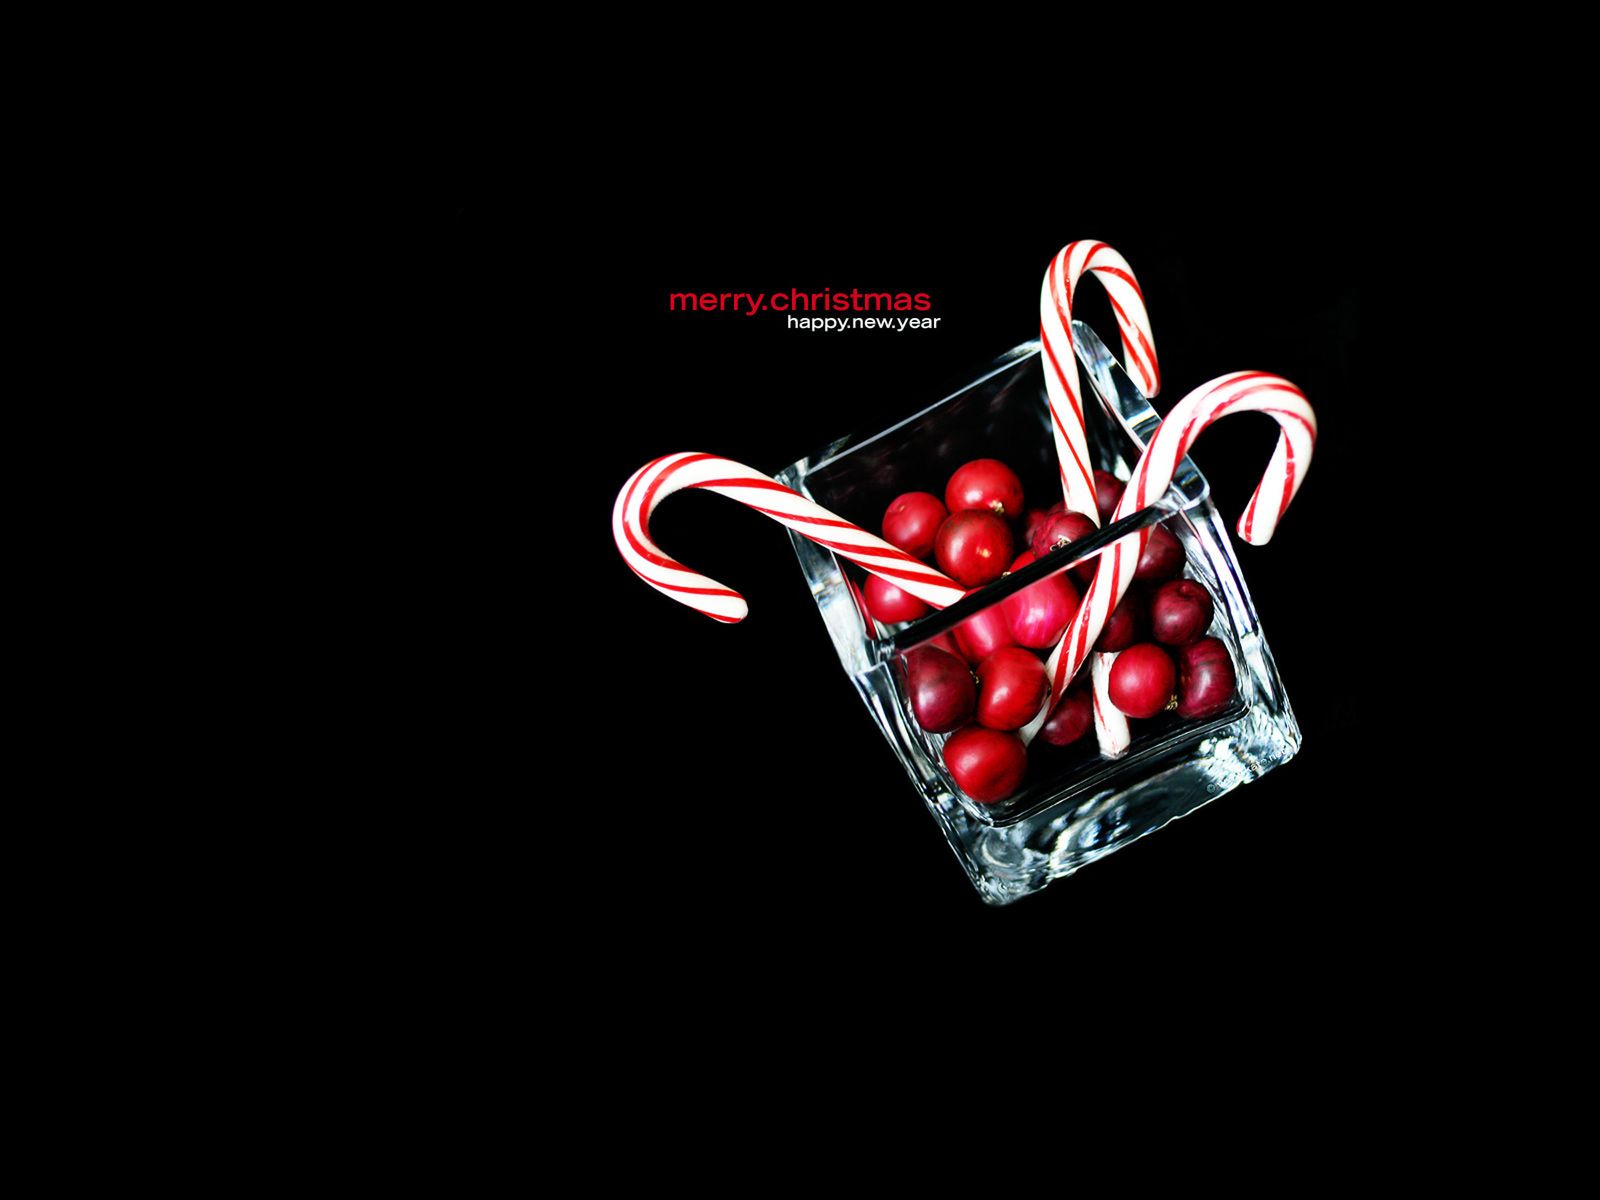 Black Christmas Candy Cane HD Slides Background for Powerpoint